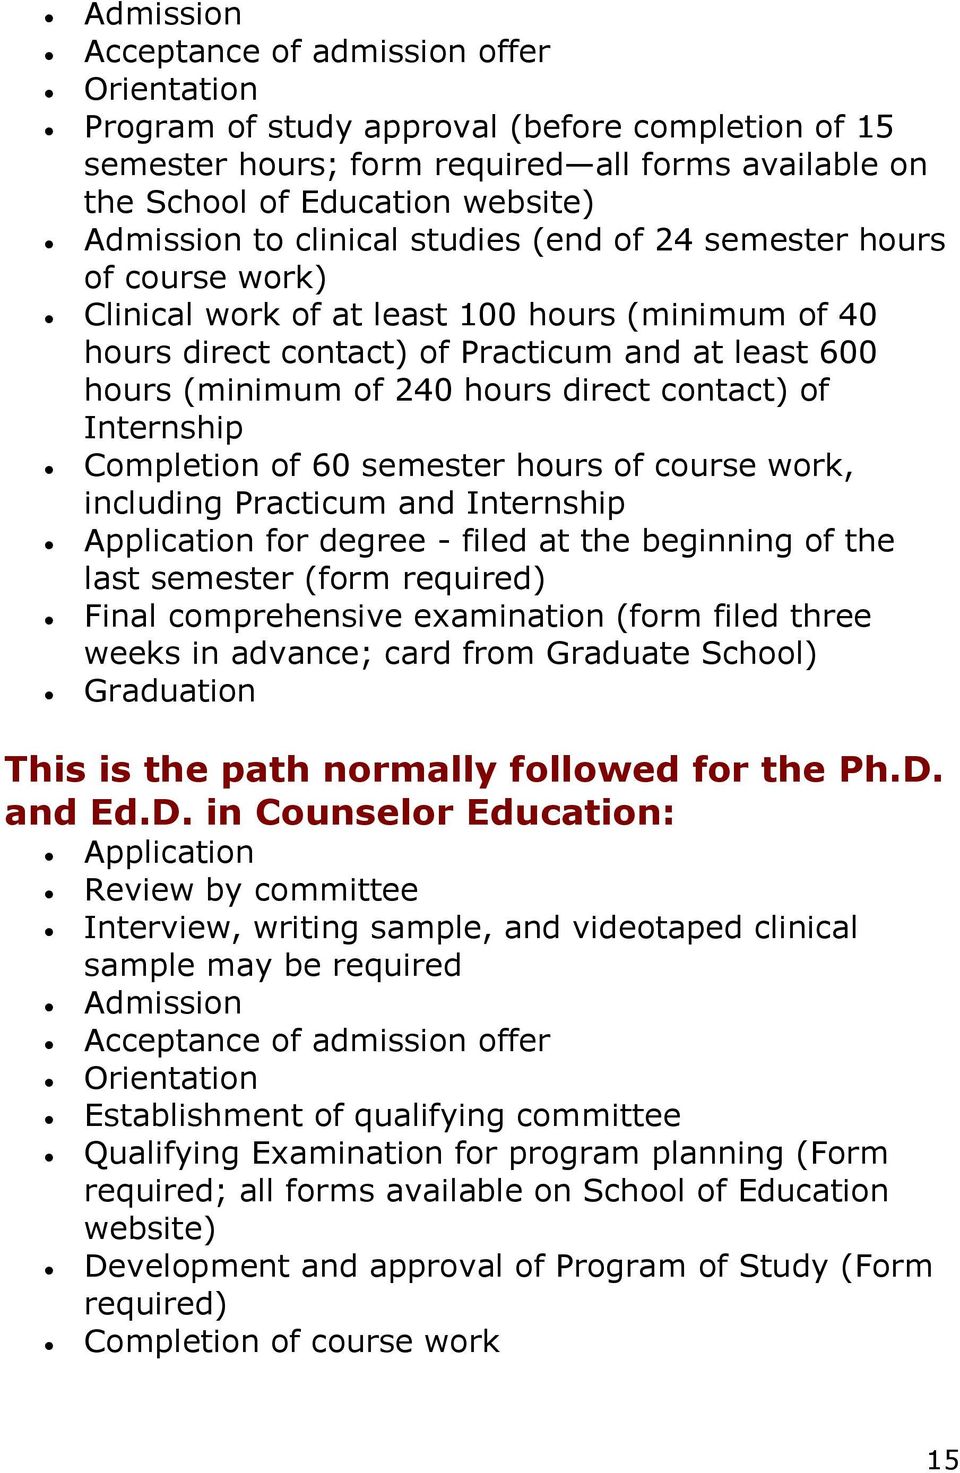 contact) of Internship Completion of 60 semester hours of course work, including Practicum and Internship Application for degree - filed at the beginning of the last semester (form required) Final